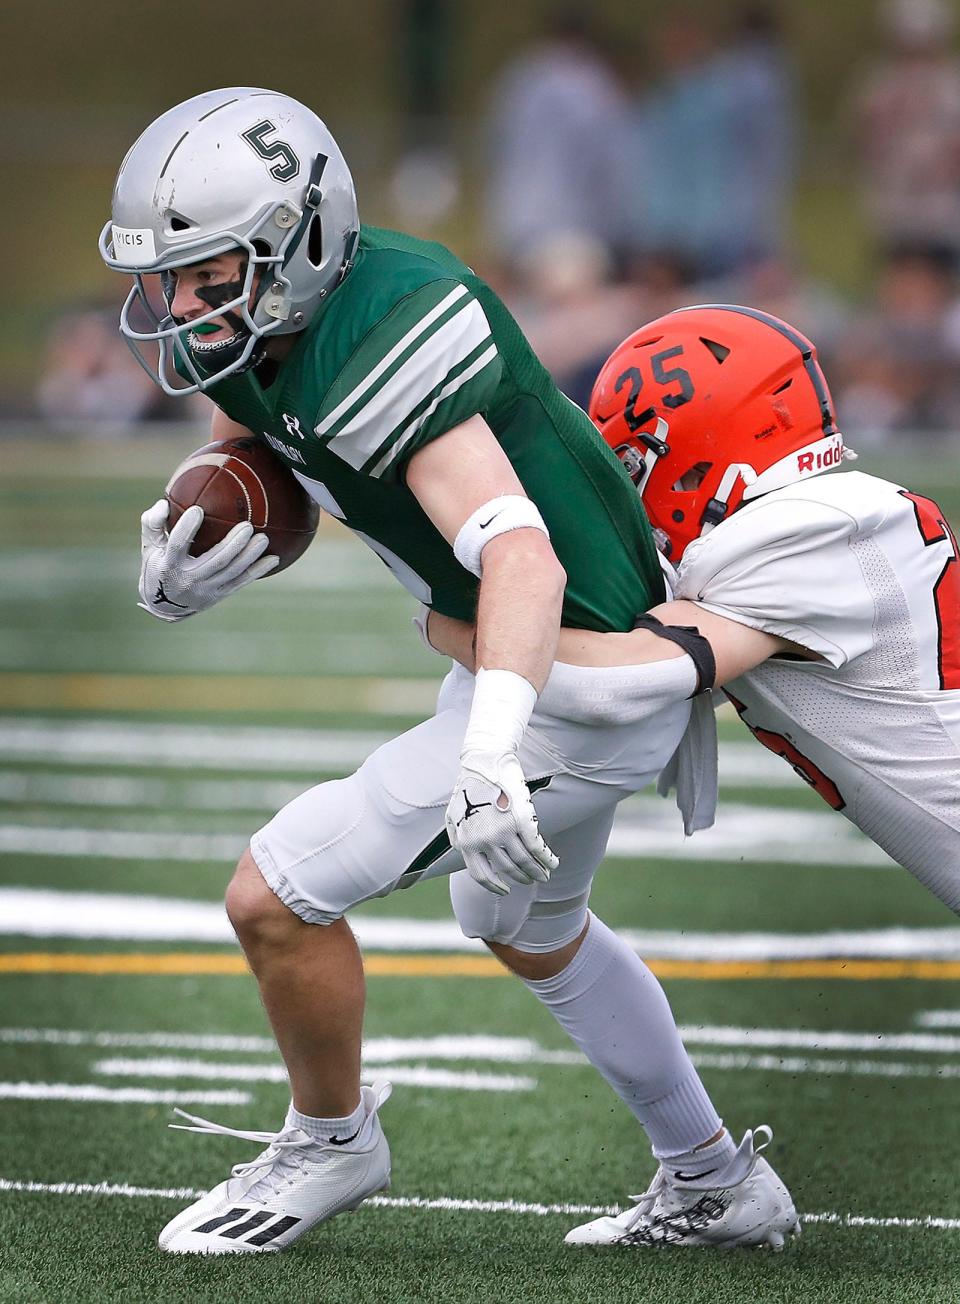 Duxbury #5 senior captain Chris Walsh fights for a few extra yards with Middleboro's Jack Kavaleski on his back.
The Duxbury Dragons hosted the Middleboro Sachems in MIAA football tournament action on Friday November 11, 2022.